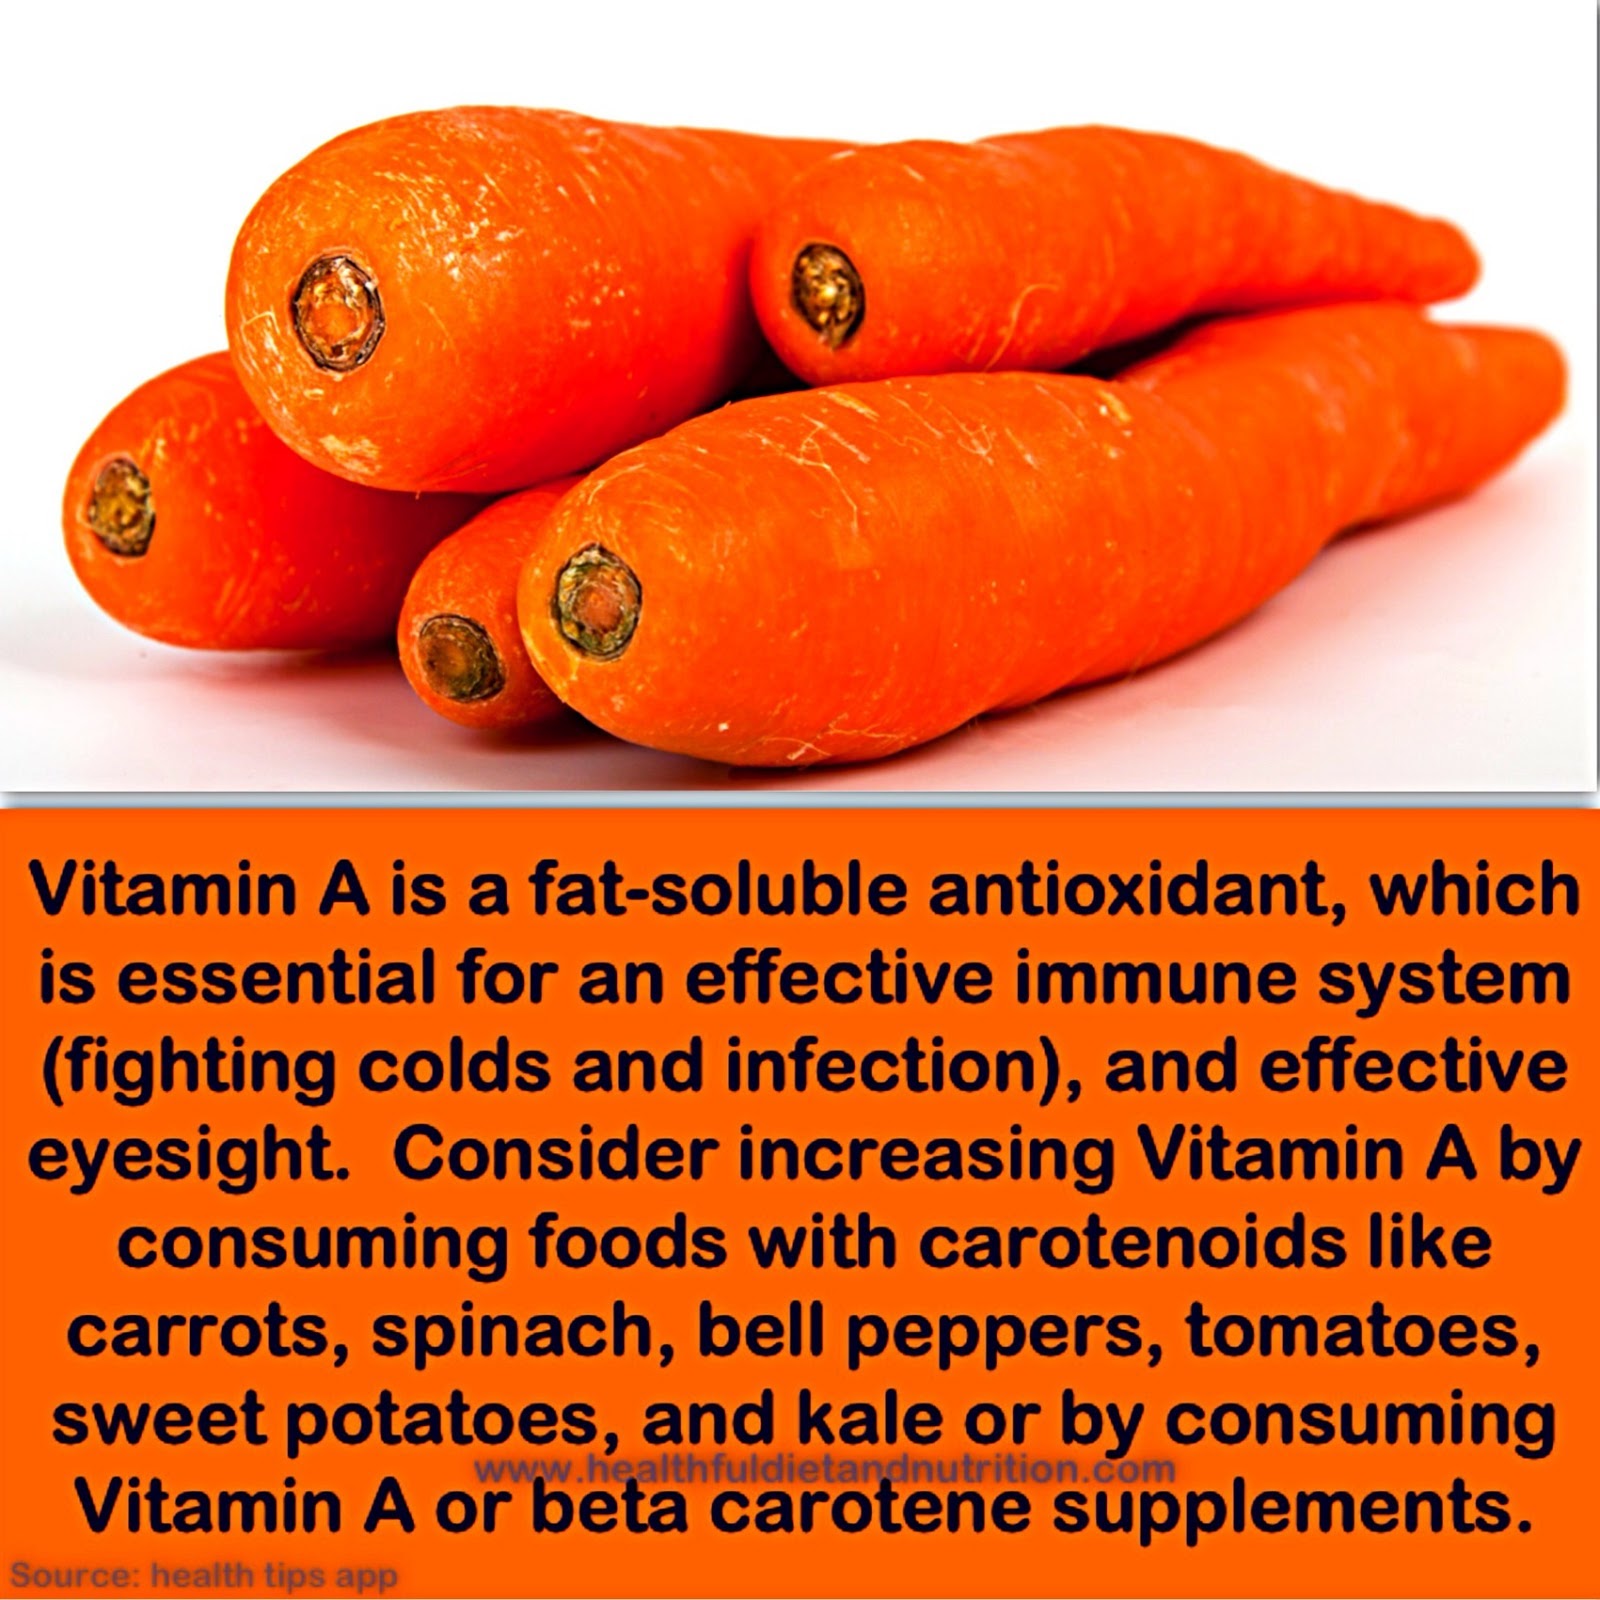 Consume Vitamin A Rich Foods